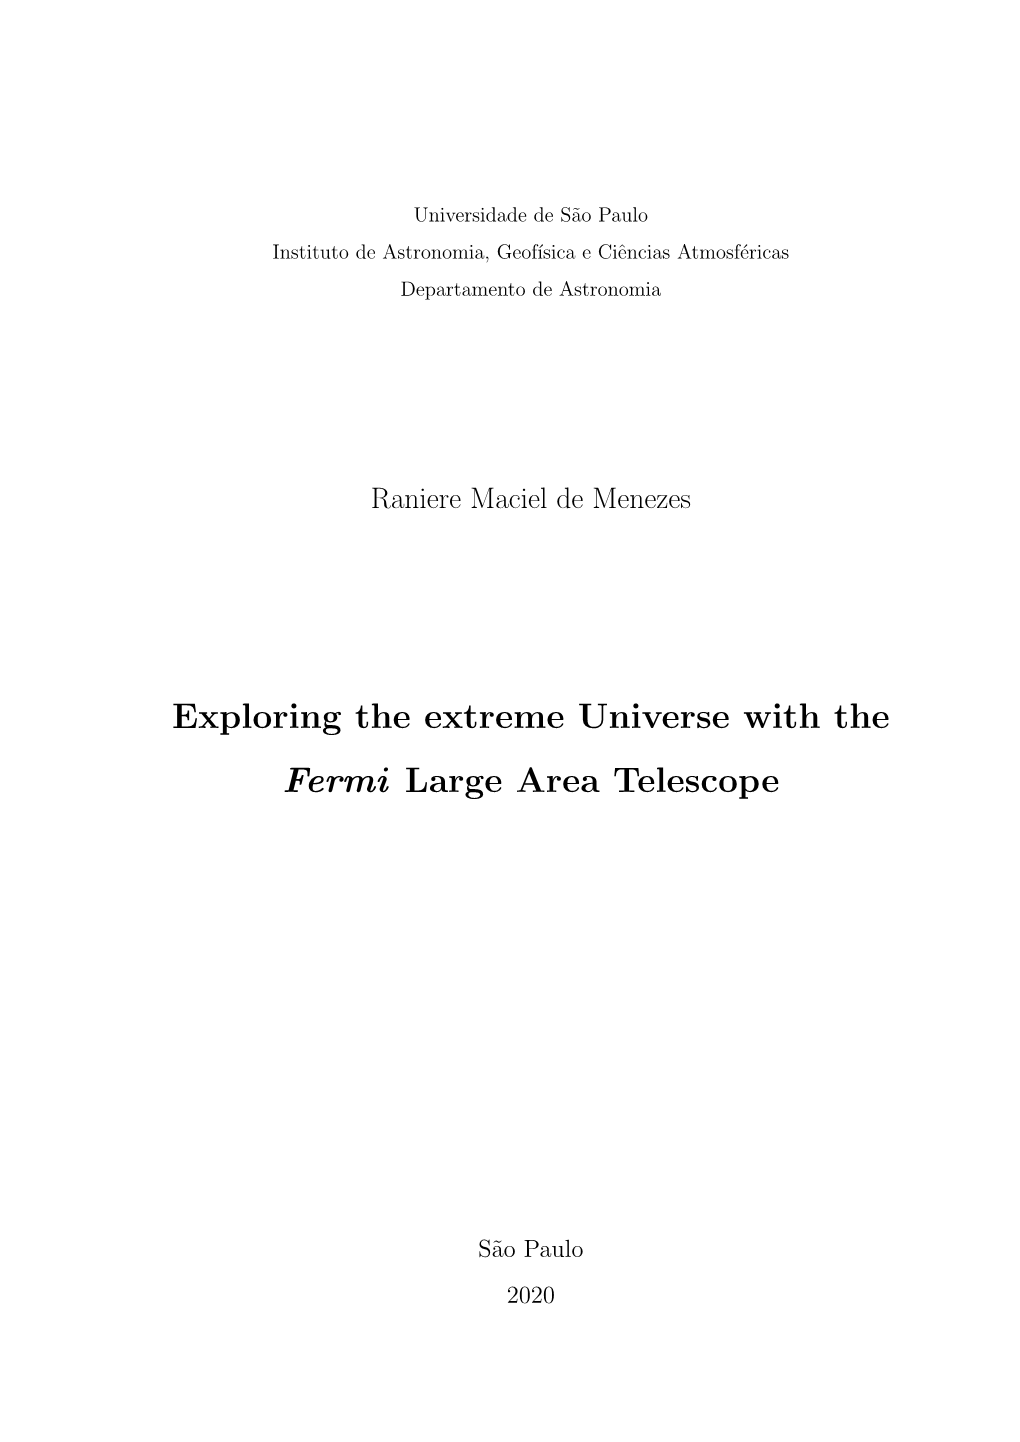 Exploring the Extreme Universe with the Fermi Large Area Telescope